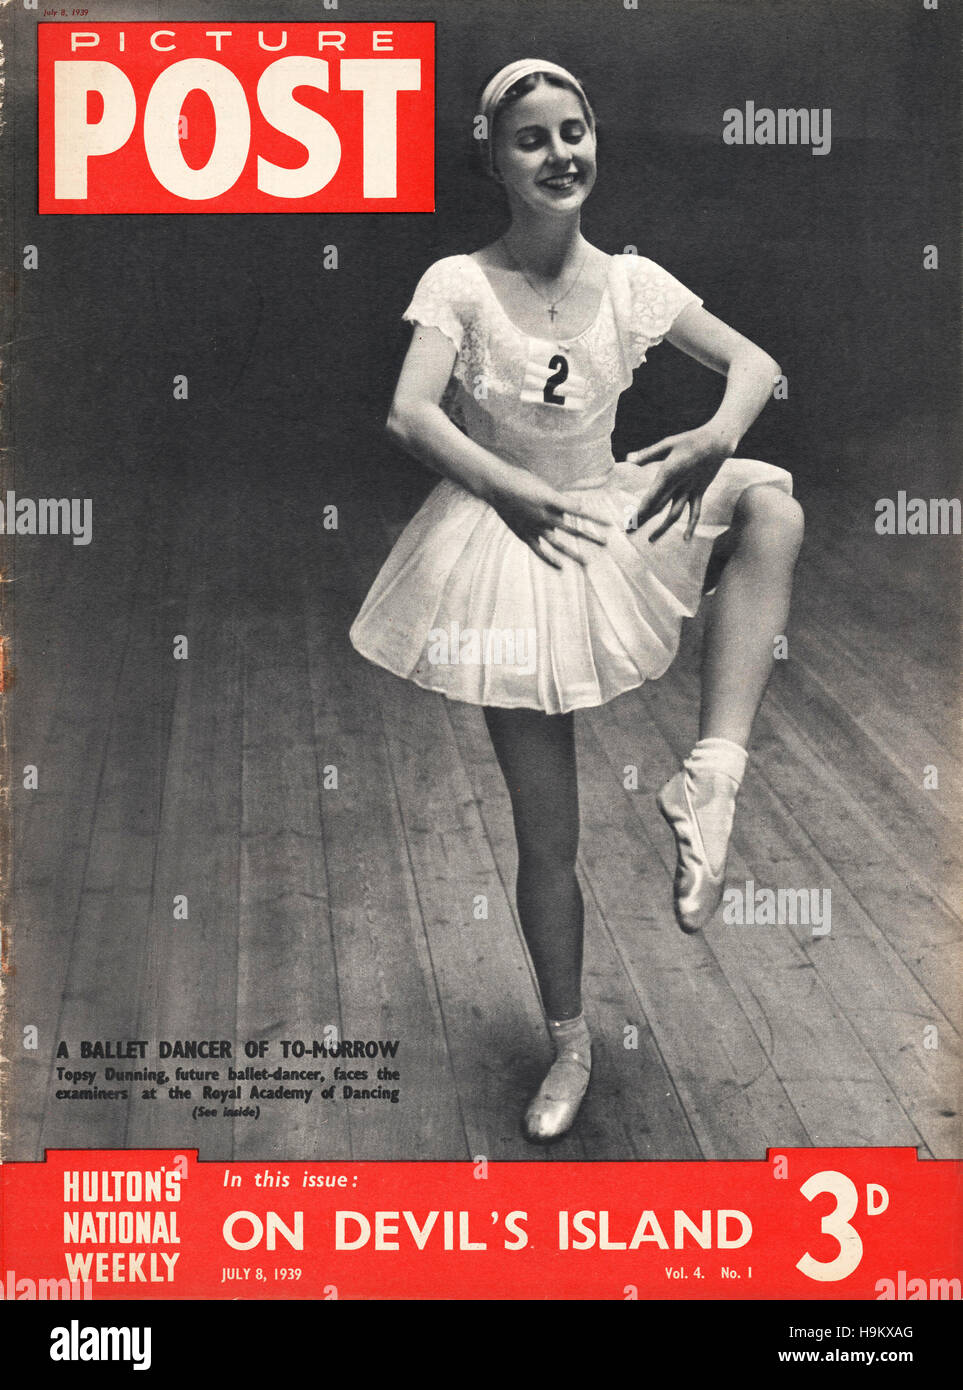 1939 Picture Post Ballet dancer Paula 'Topsy' Dunning Stock Photo